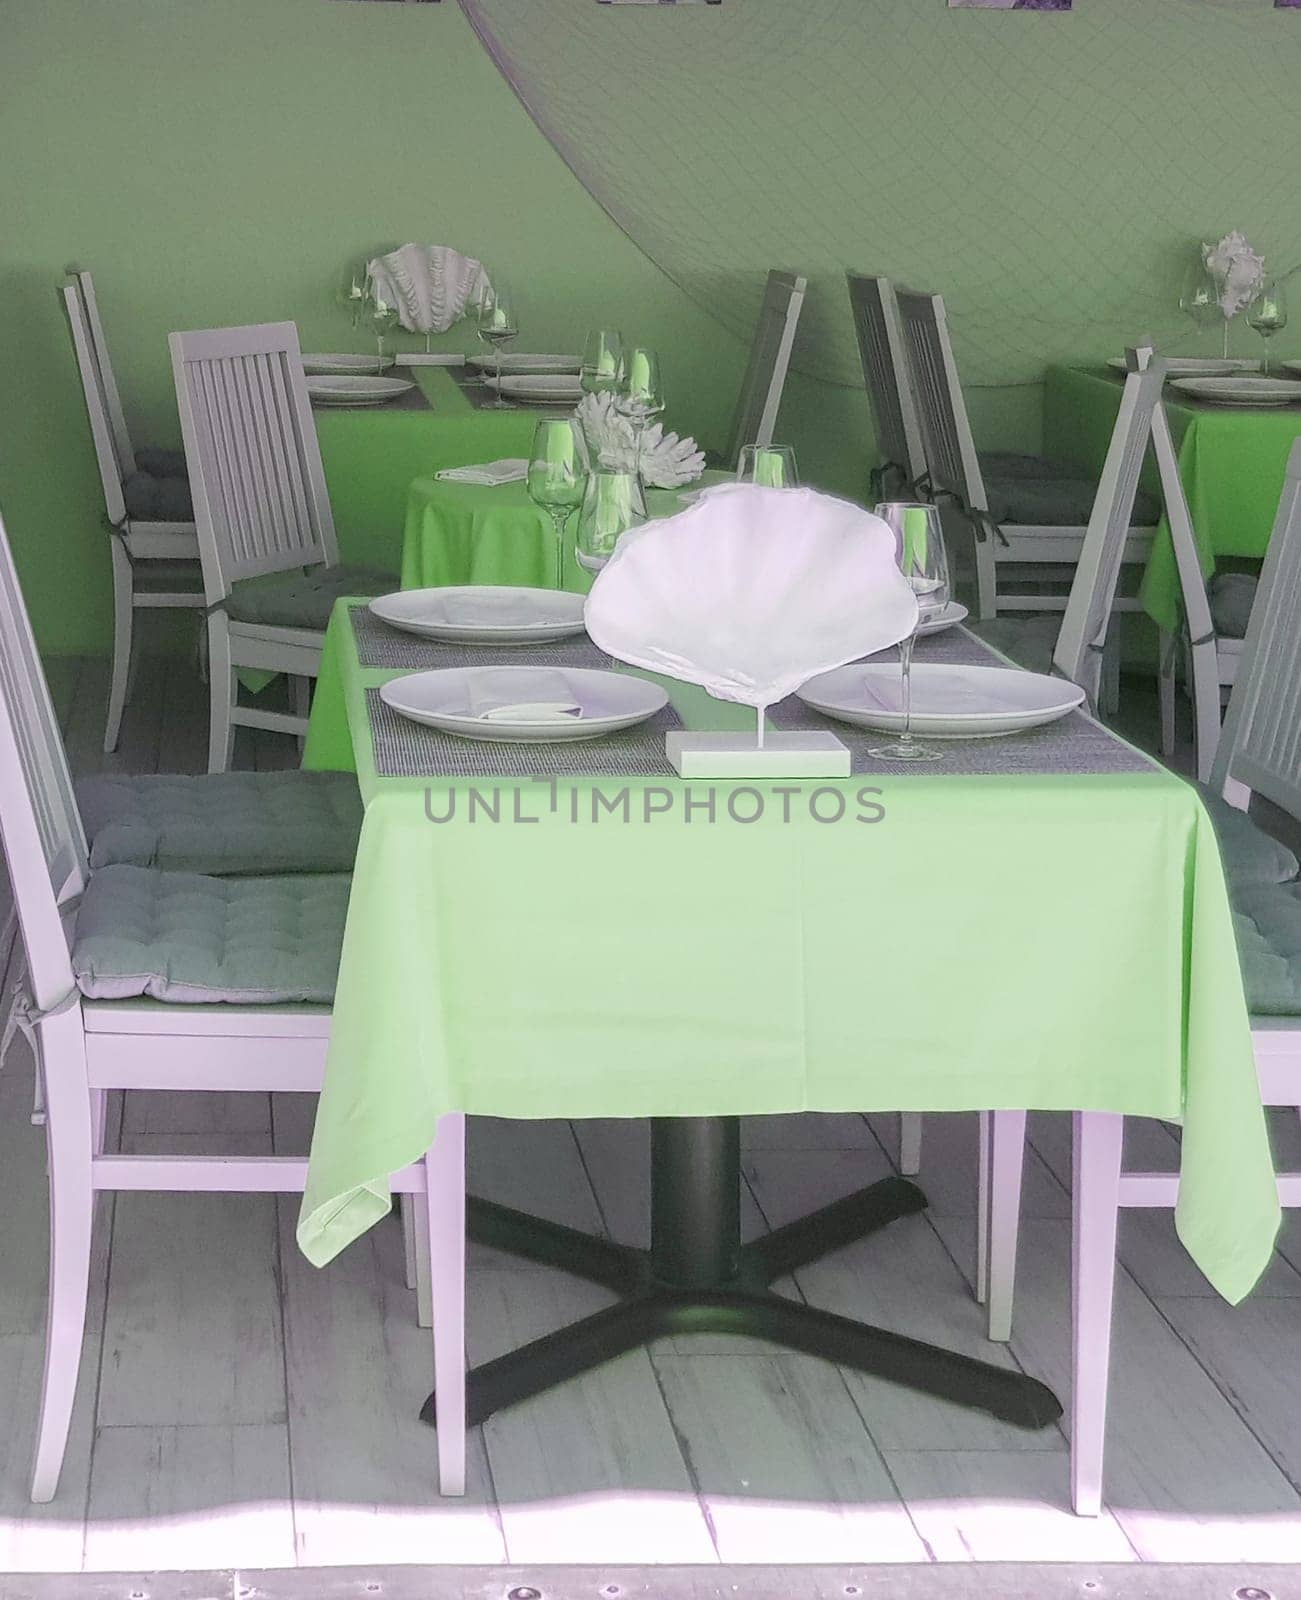 Beautiful table setting with glasses, tablecloth, plates in a nautical style in a fish restaurant, green tinting by claire_lucia